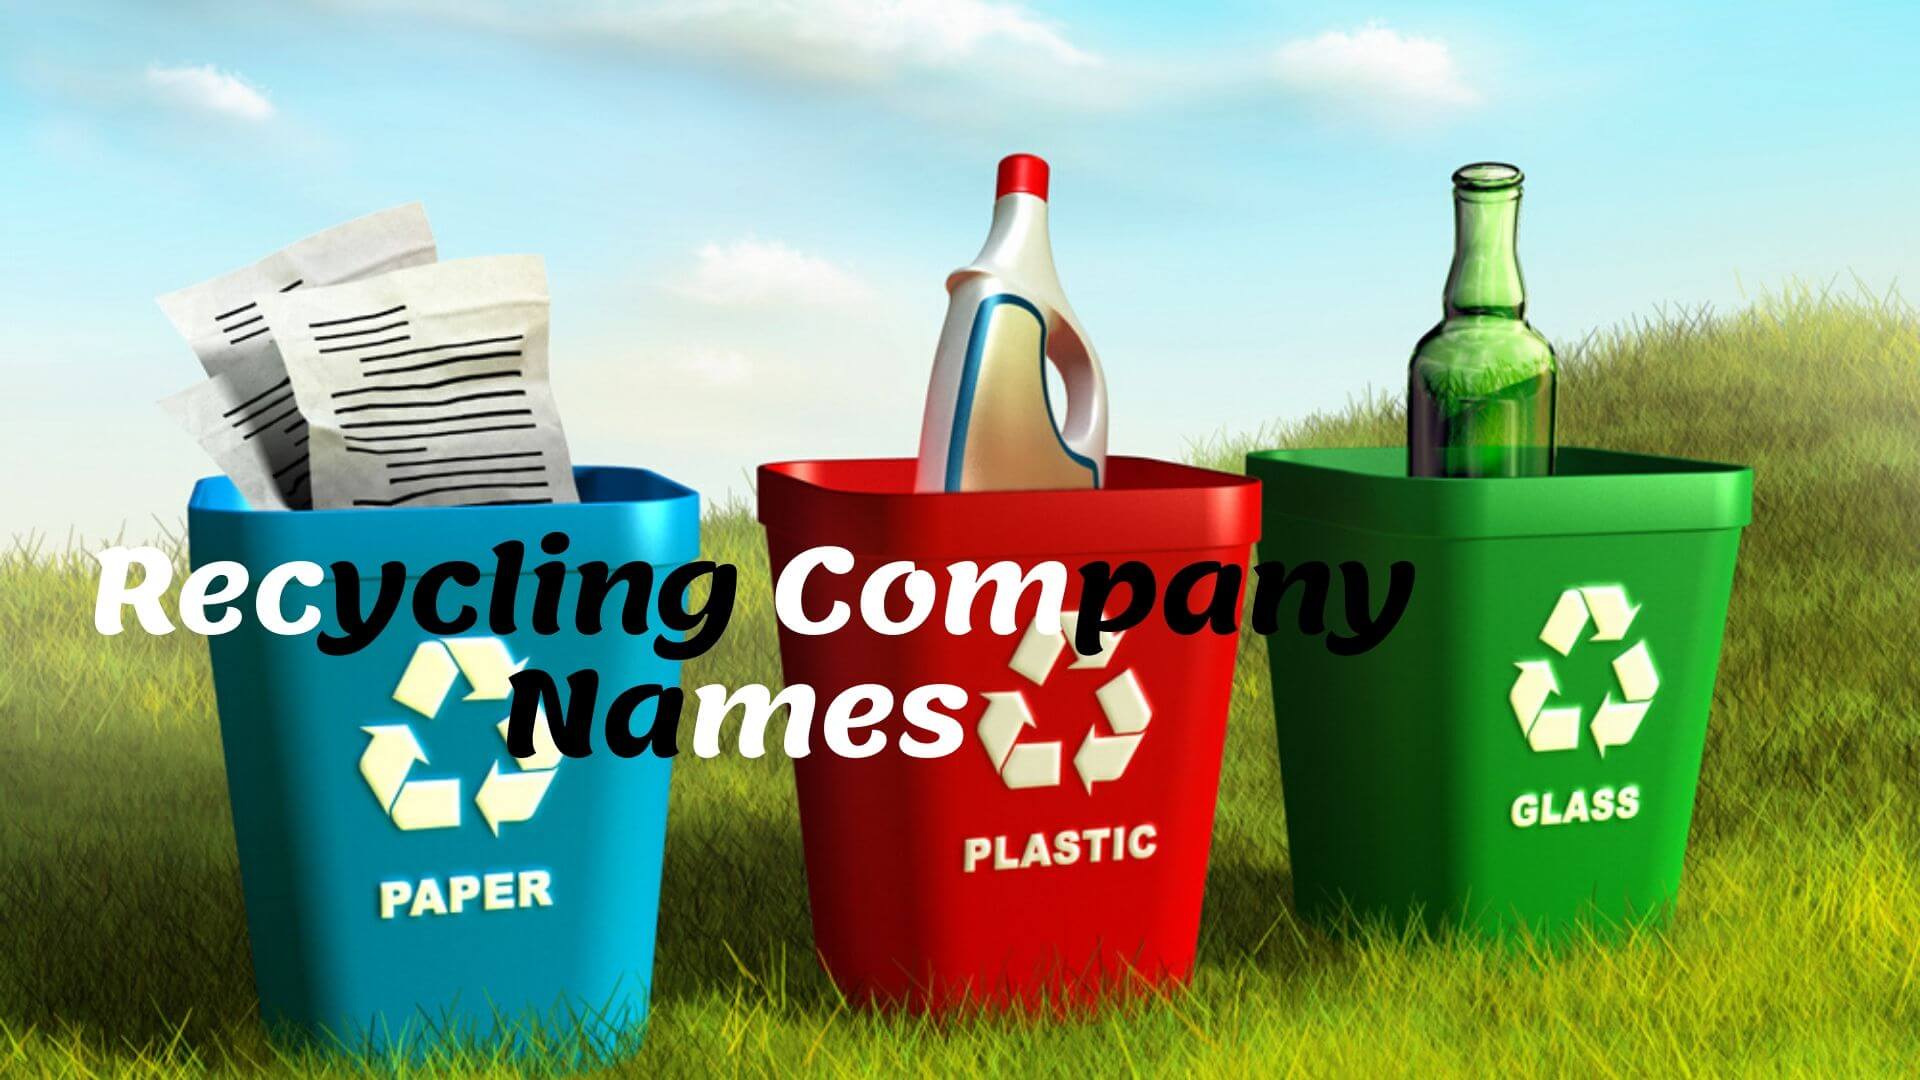 Recycling Companies Names